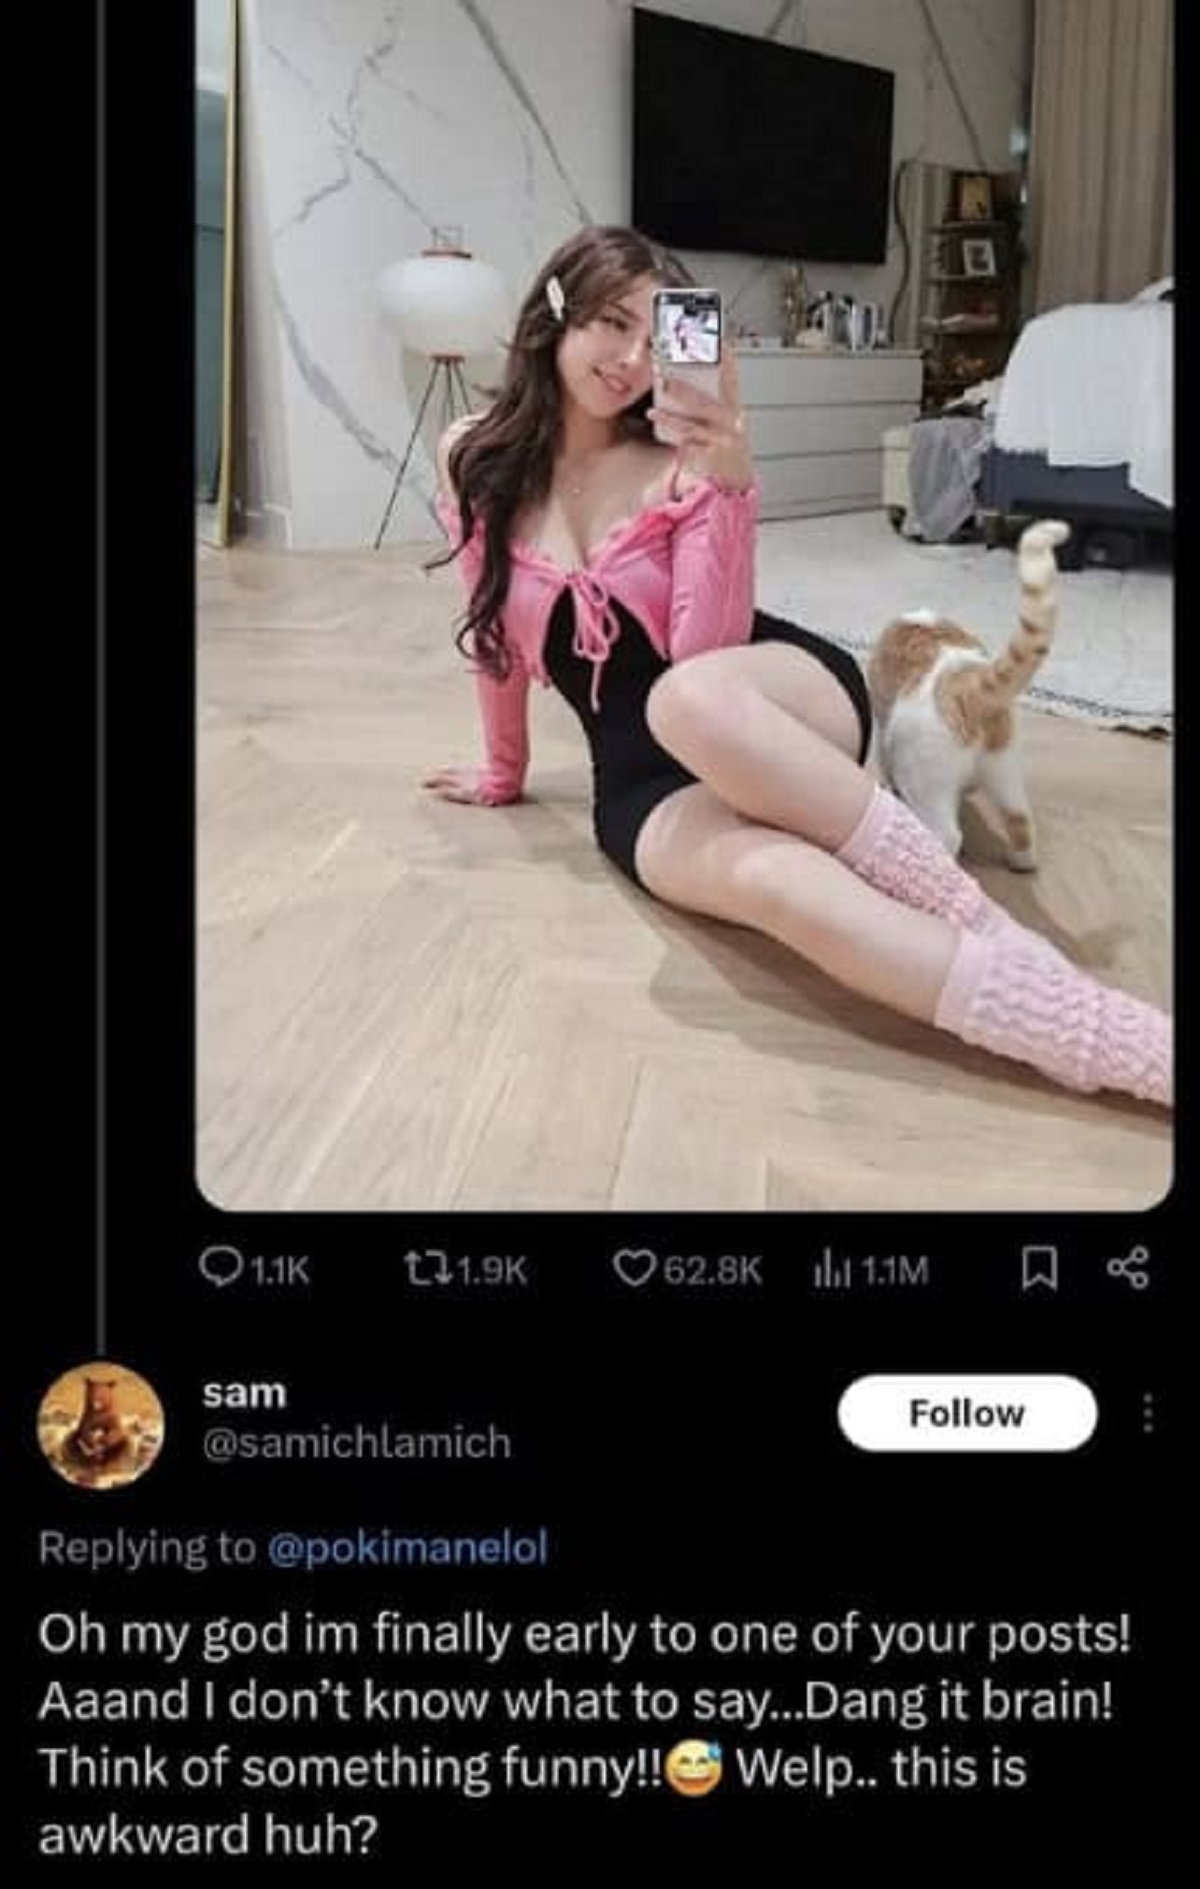 pokimane hot - Q t 1.1M sam Oh my god im finally early to one of your posts! Aaand I don't know what to say...Dang it brain! Think of something funny!!Welp.. this is awkward huh?